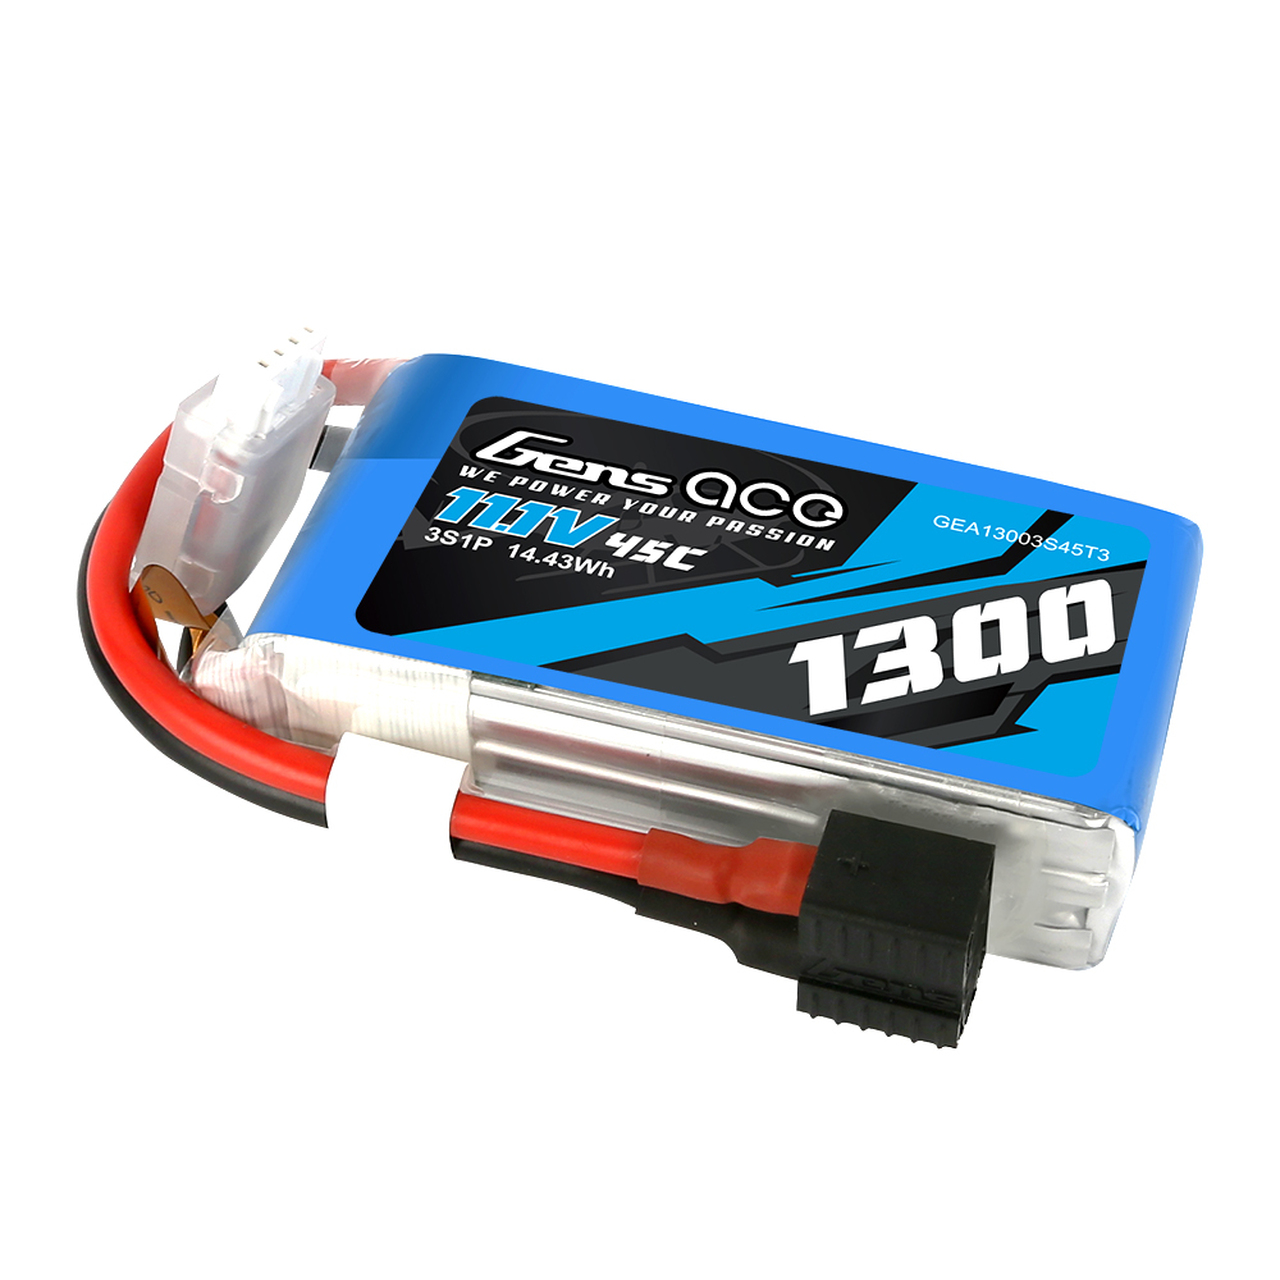 Gens ace 11.1V 45C 3S 1300mAh Lipo Battery Pack with EC3 and Deans adapter for Xmaxx 8S Car